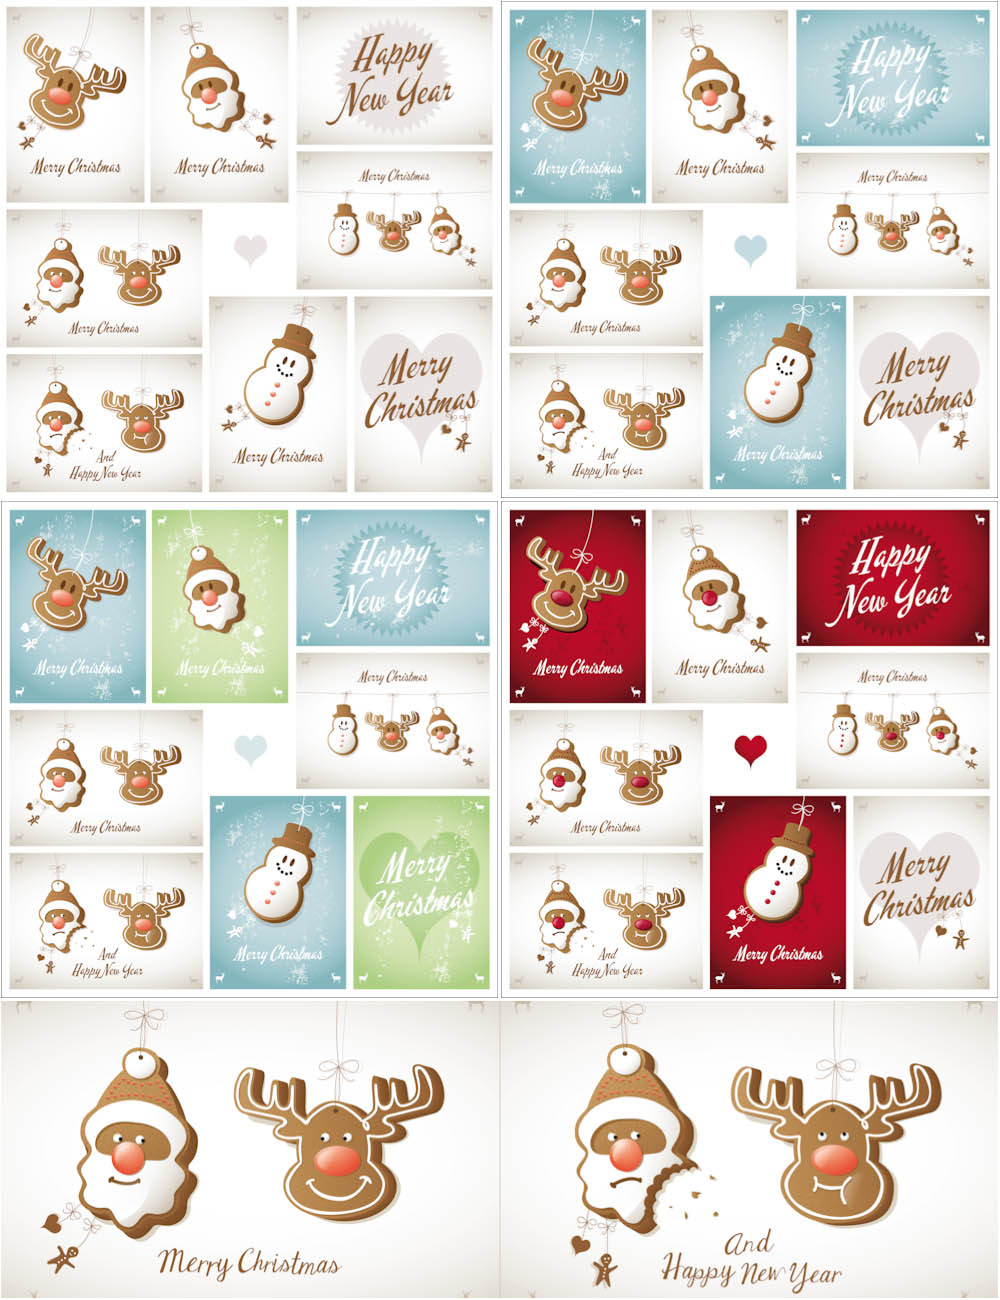 Christmas background with Santa, reindeer and snowman